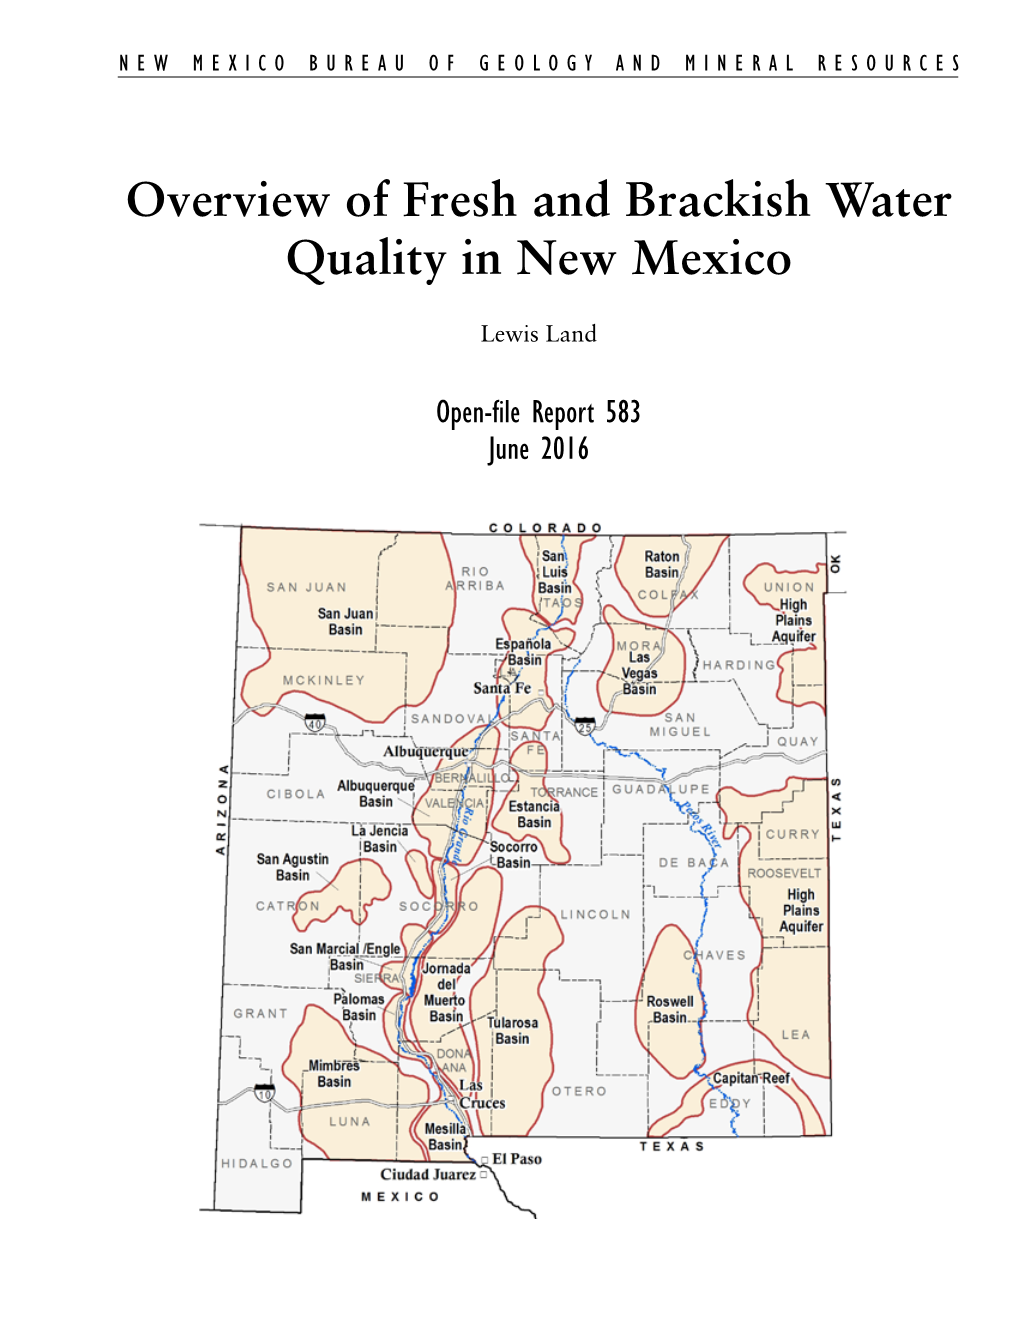 Overview of Fresh and Brackish Water Quality in New Mexico